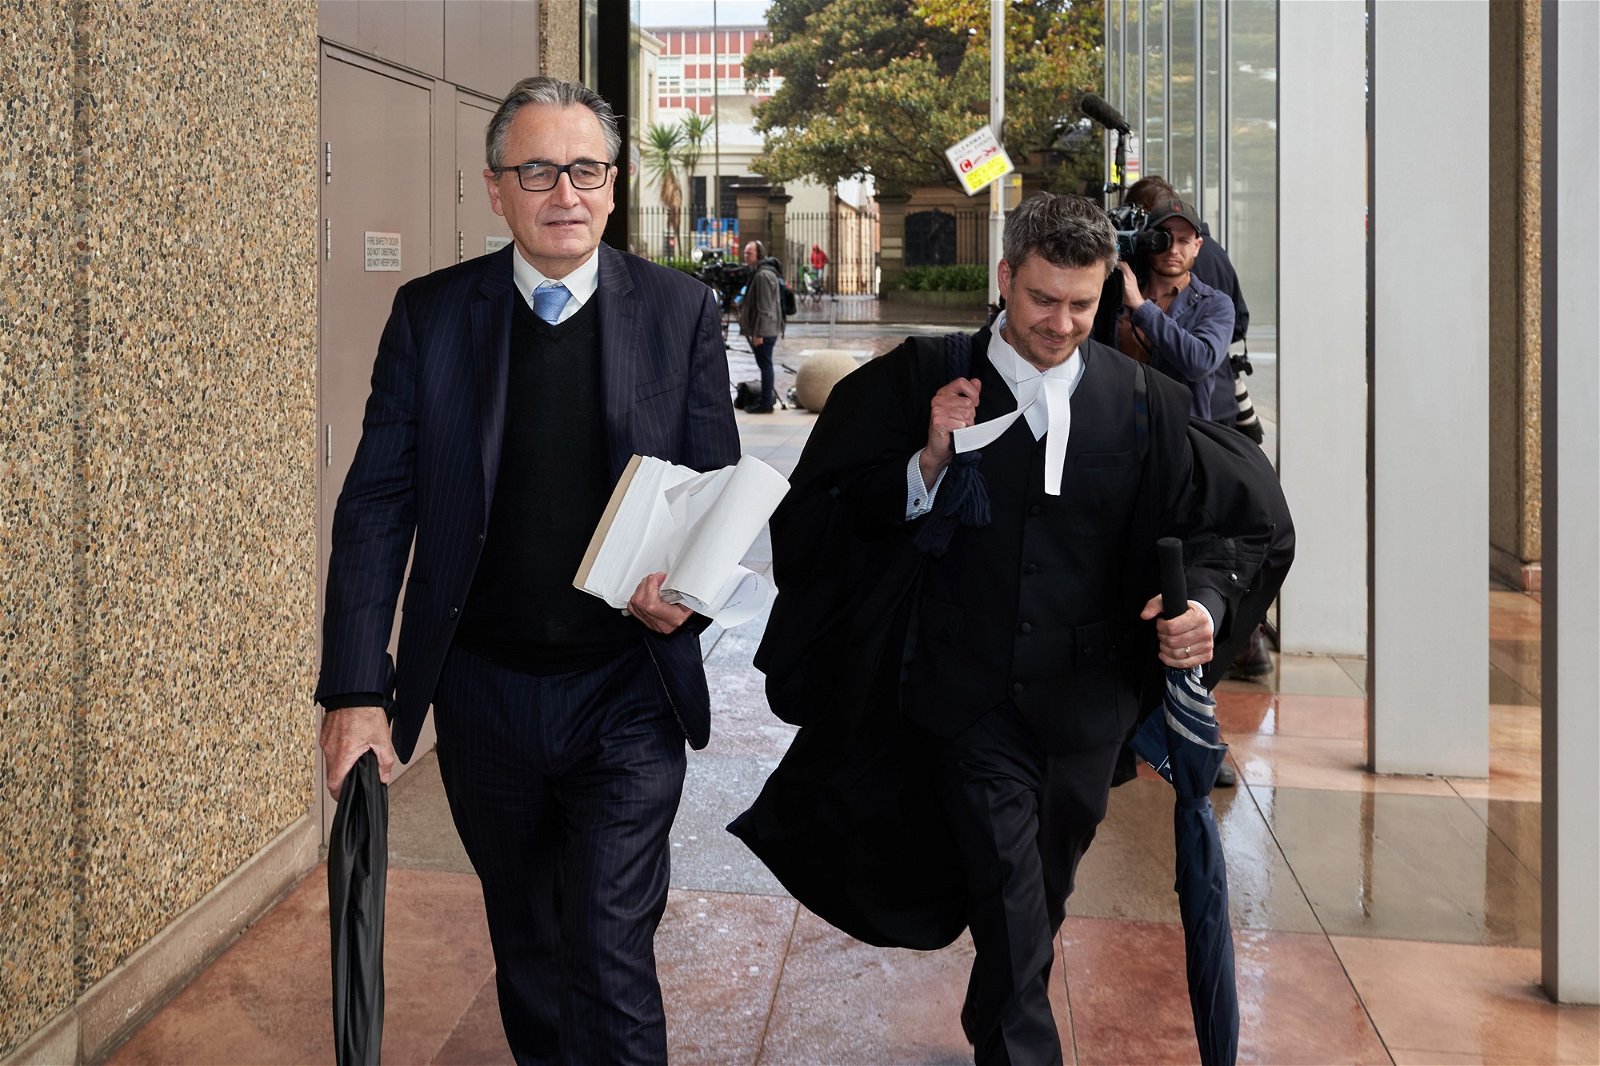 Barrister in robes walks from court with a lawyer holding a book